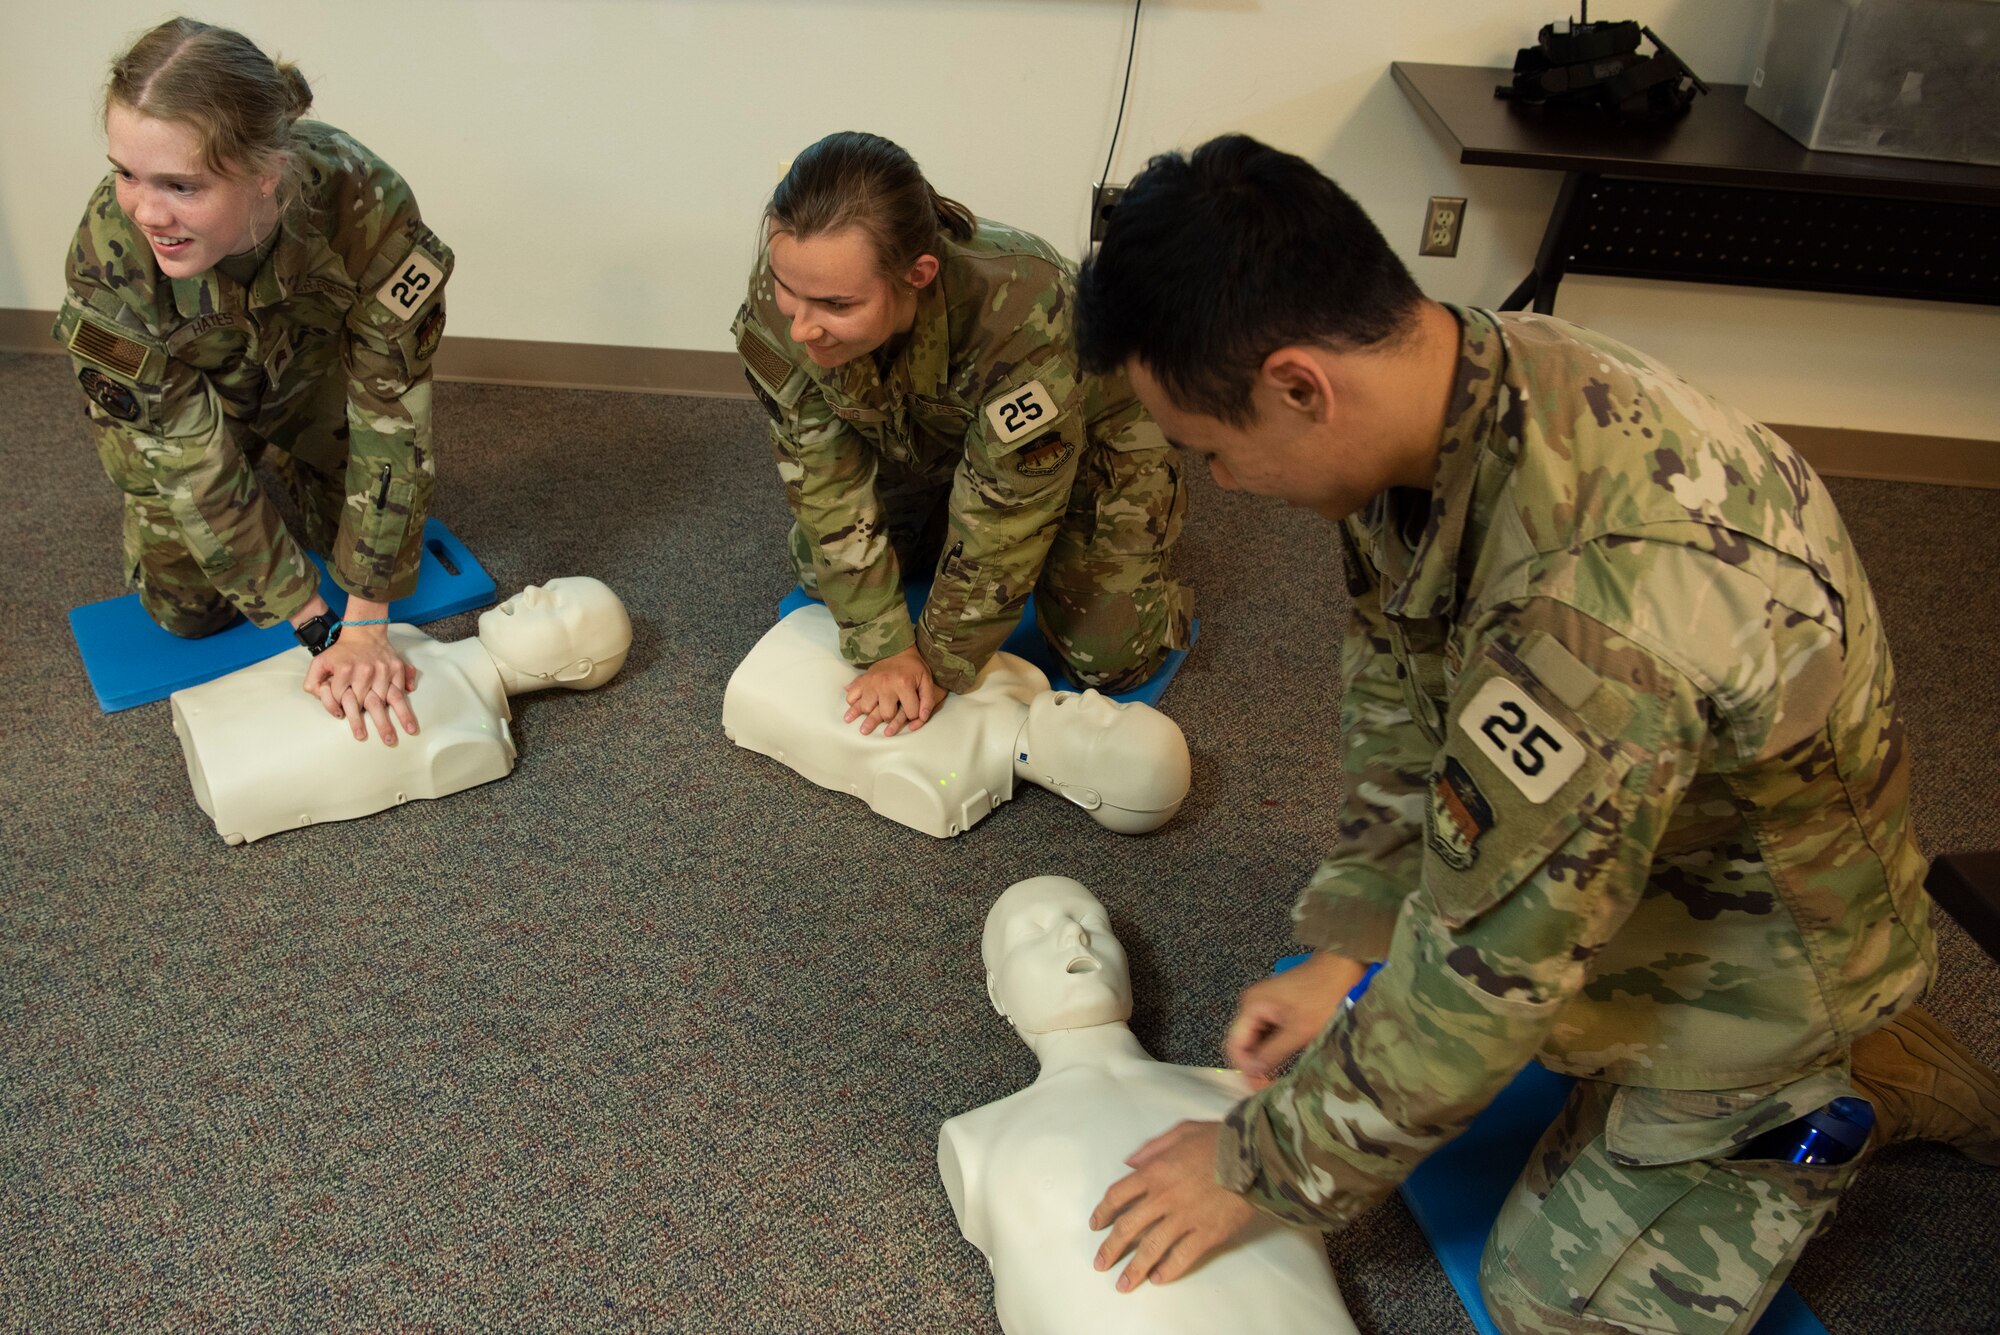 U.S. Air Force Academy cadets practice CPR at the 7th Medical Group at Dyess Air Force Base, Texas, June 29, 2023. Dyess hosted groups of Academy and Air Force ROTC cadets in a program that offered prospective officers the opportunity to learn about the base mission and career fields they may be interested in. The cadets toured 14 units around the base like security forces, logistics, medical, flightline operations and civil engineering. (U.S. Air Force photo by Airman 1st Class Alondra Cristobal Hernandez)